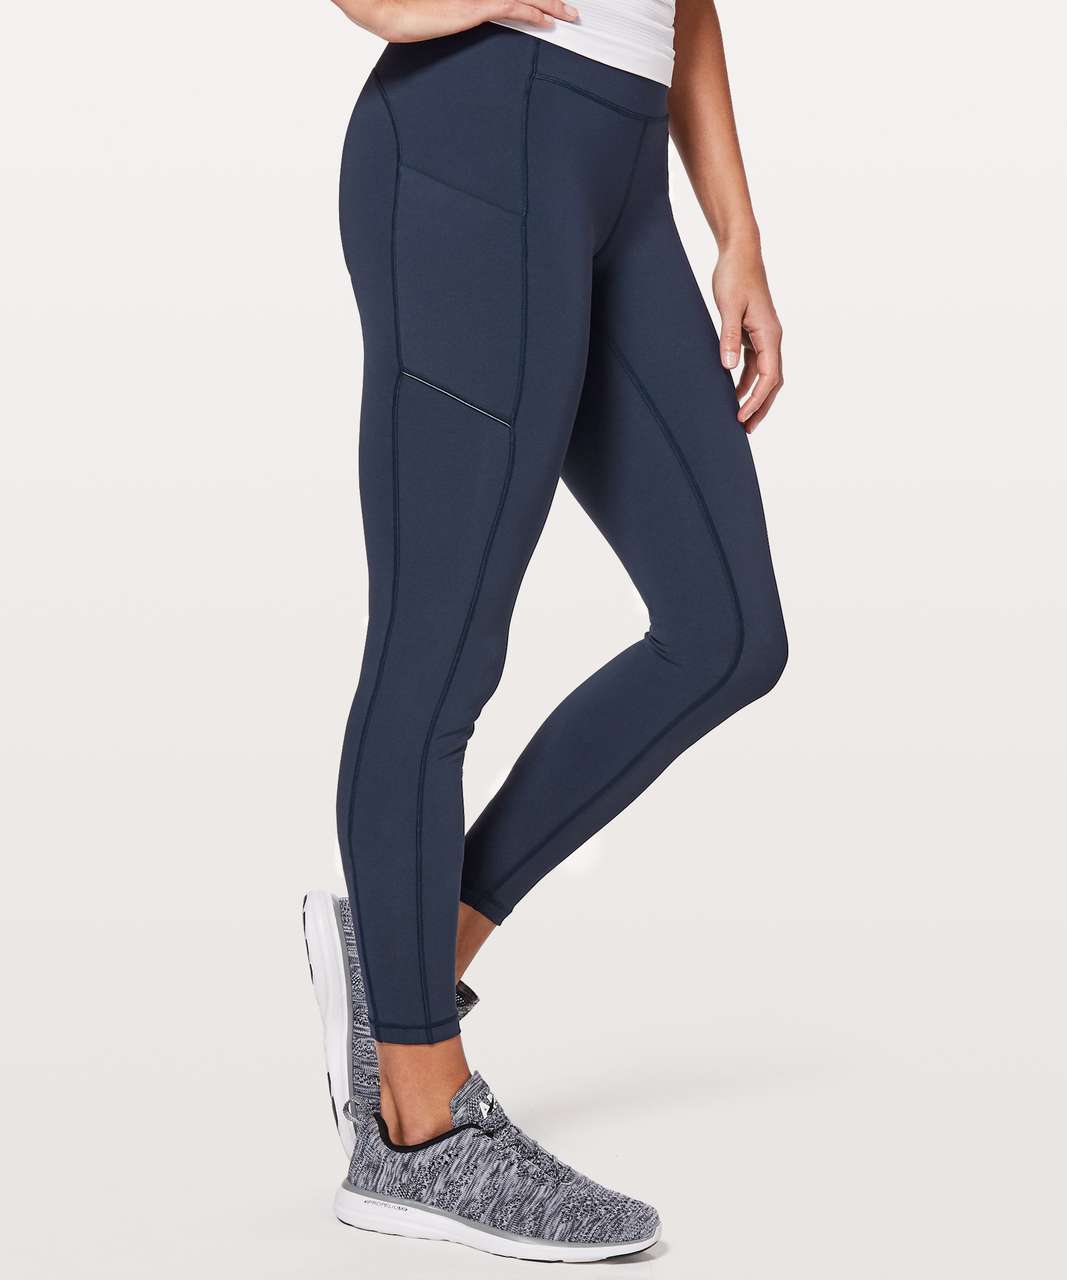 Lululemon Speed Up Tight *Full-On Luxtreme 28" - True Navy (First Release)